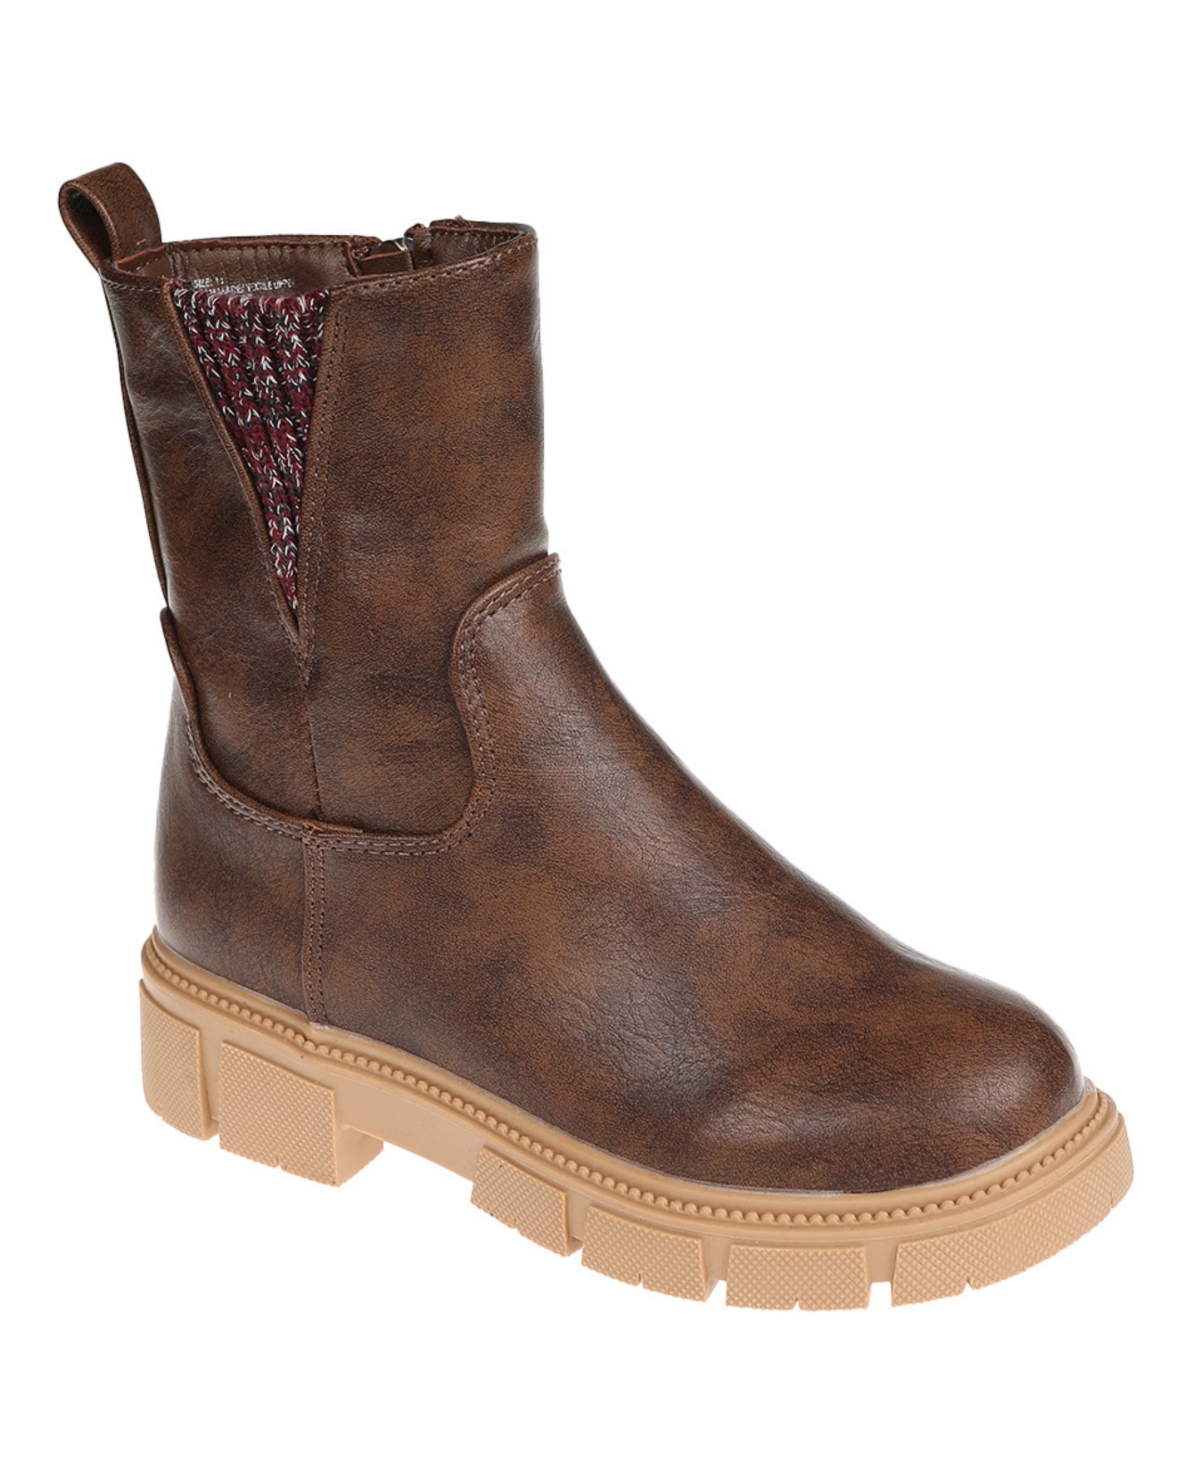 Vince Camuto Kids' Little Girls Fashion, Classic Boots With Knit In Tan